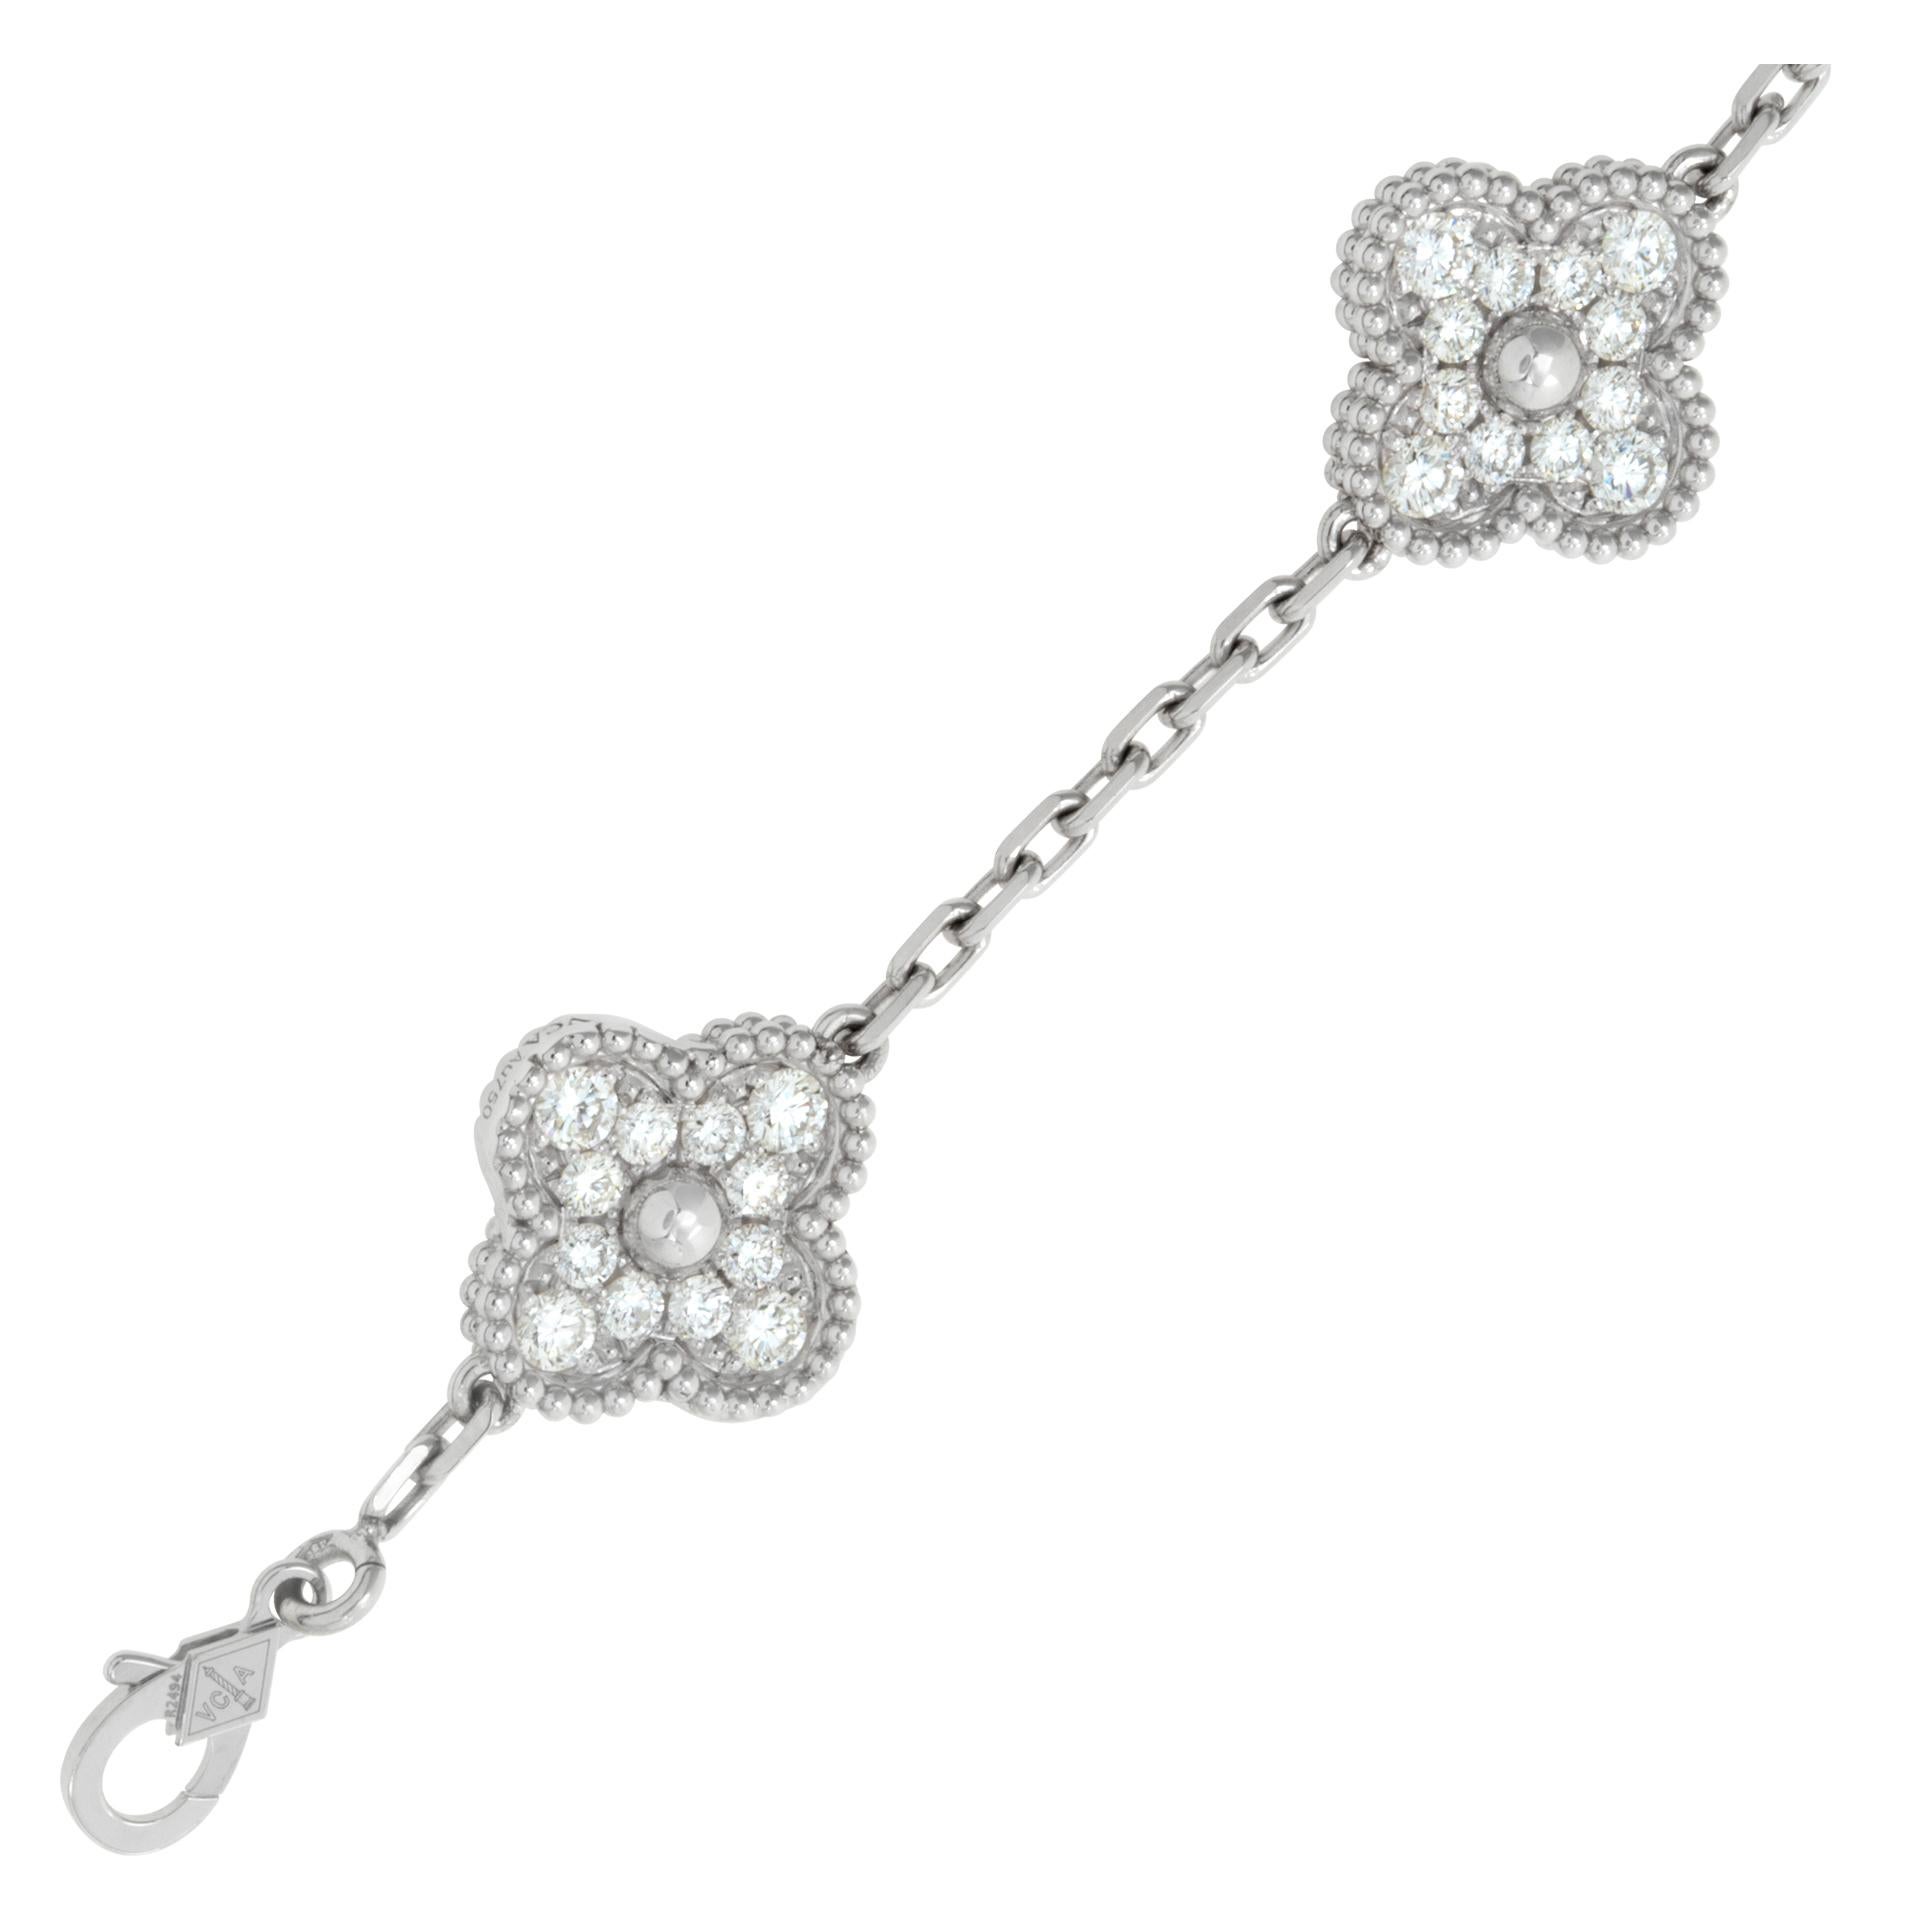 Van Cleef & Arpels Vintage Alhambra 18k white gold 5 motif diamond bracelet. VCARA41500. Length 7.5'' with 2.42 carats in diamonds. Complete with box and papers dated 08/2018.